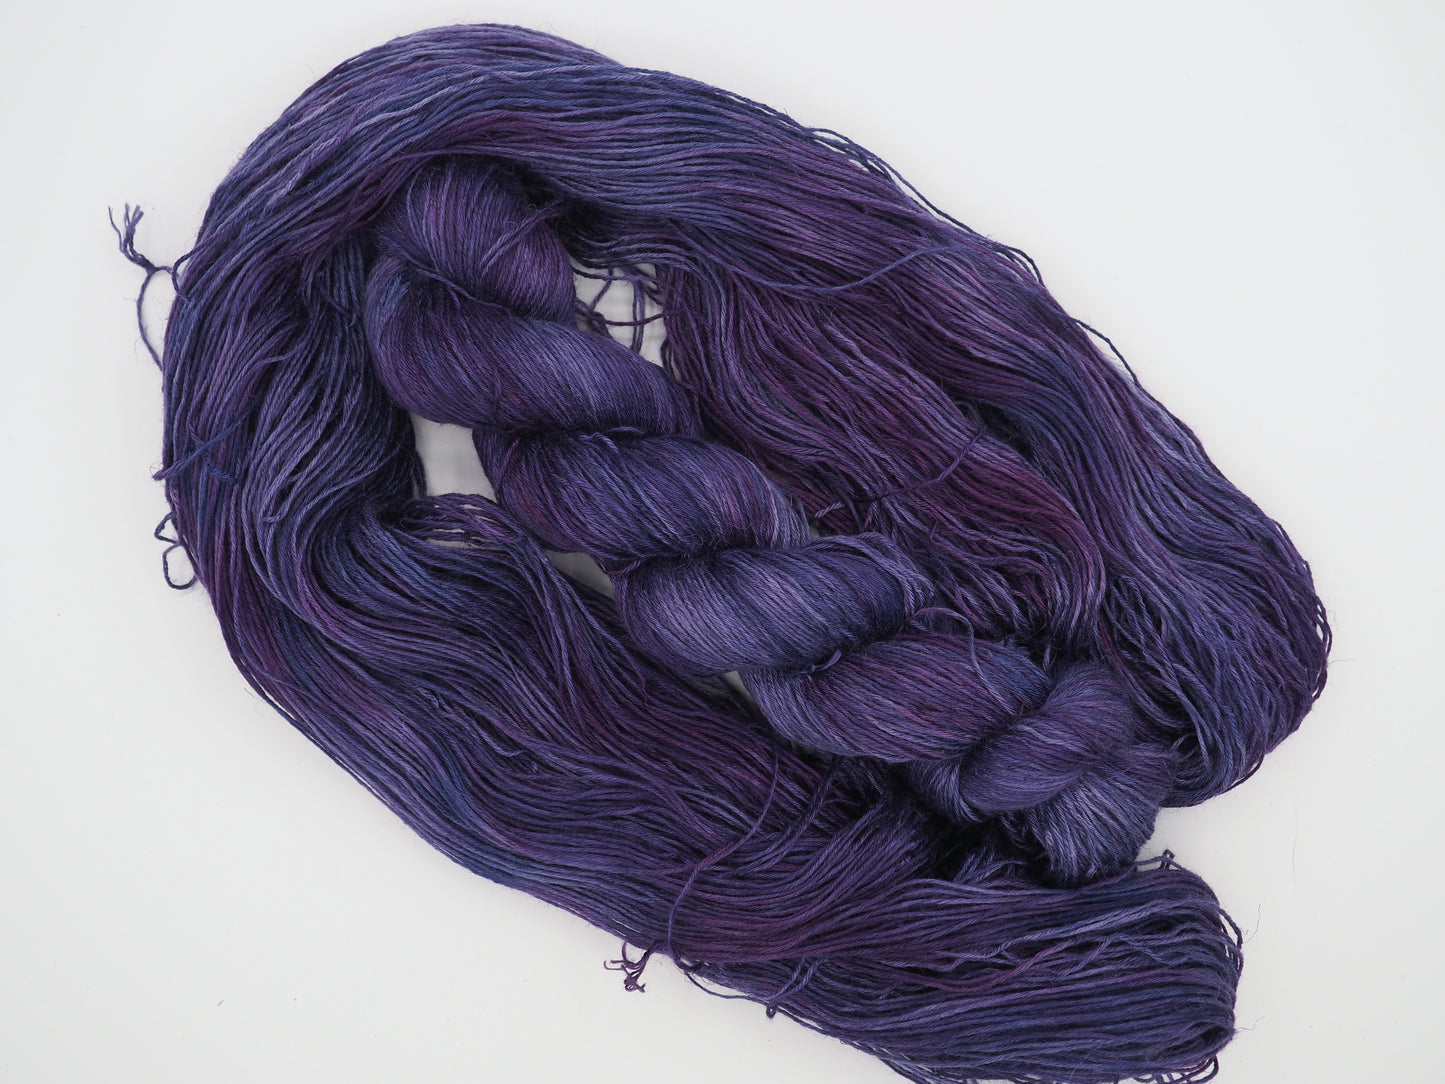 Scorpio - Dyed to Order *Please allow 3-4 weeks for dyeing*